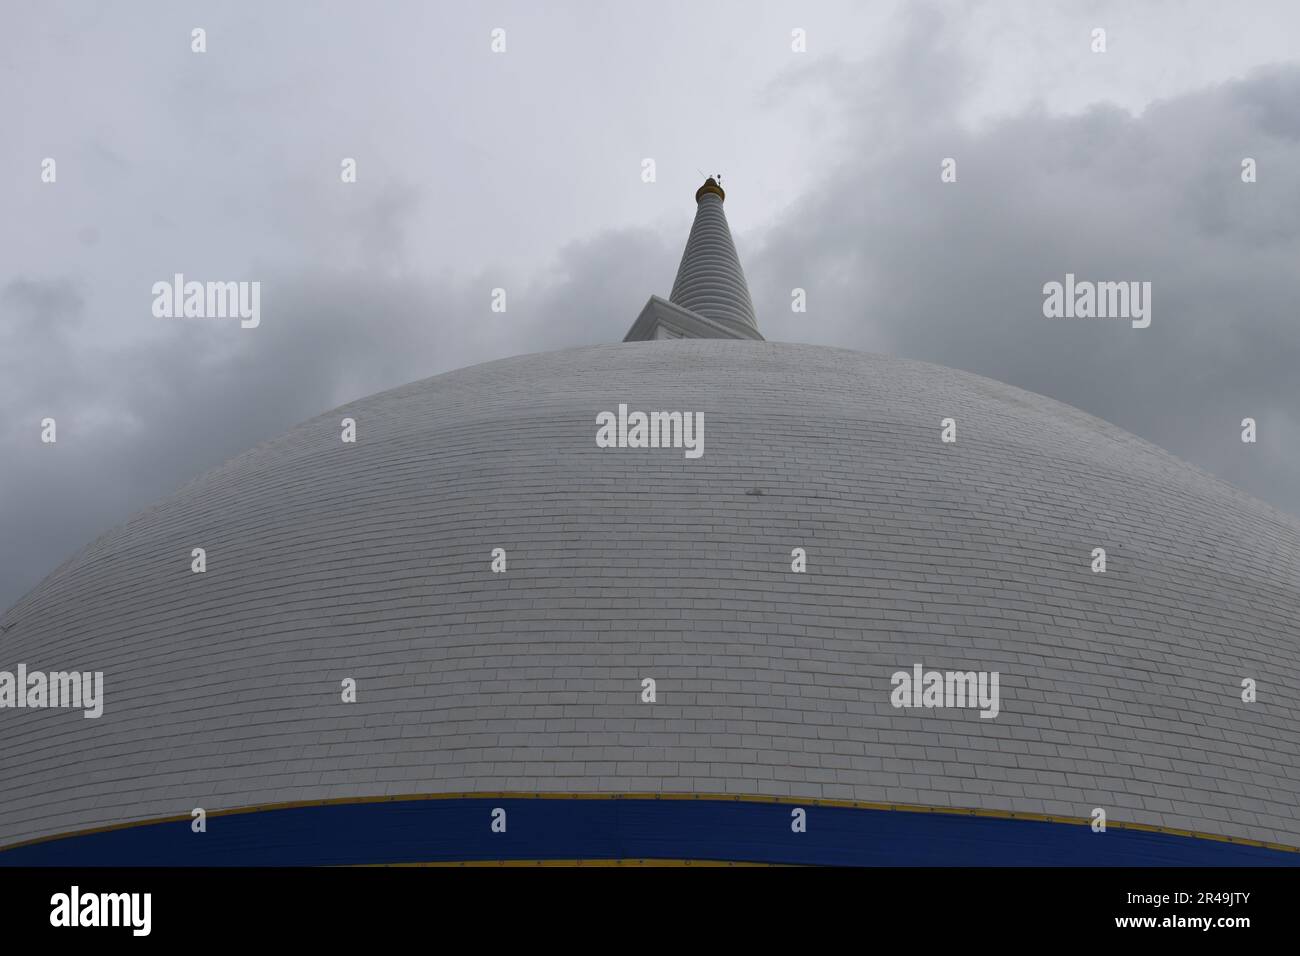 A large white domed building on a cloudy day, with the top of the dome visible Stock Photo